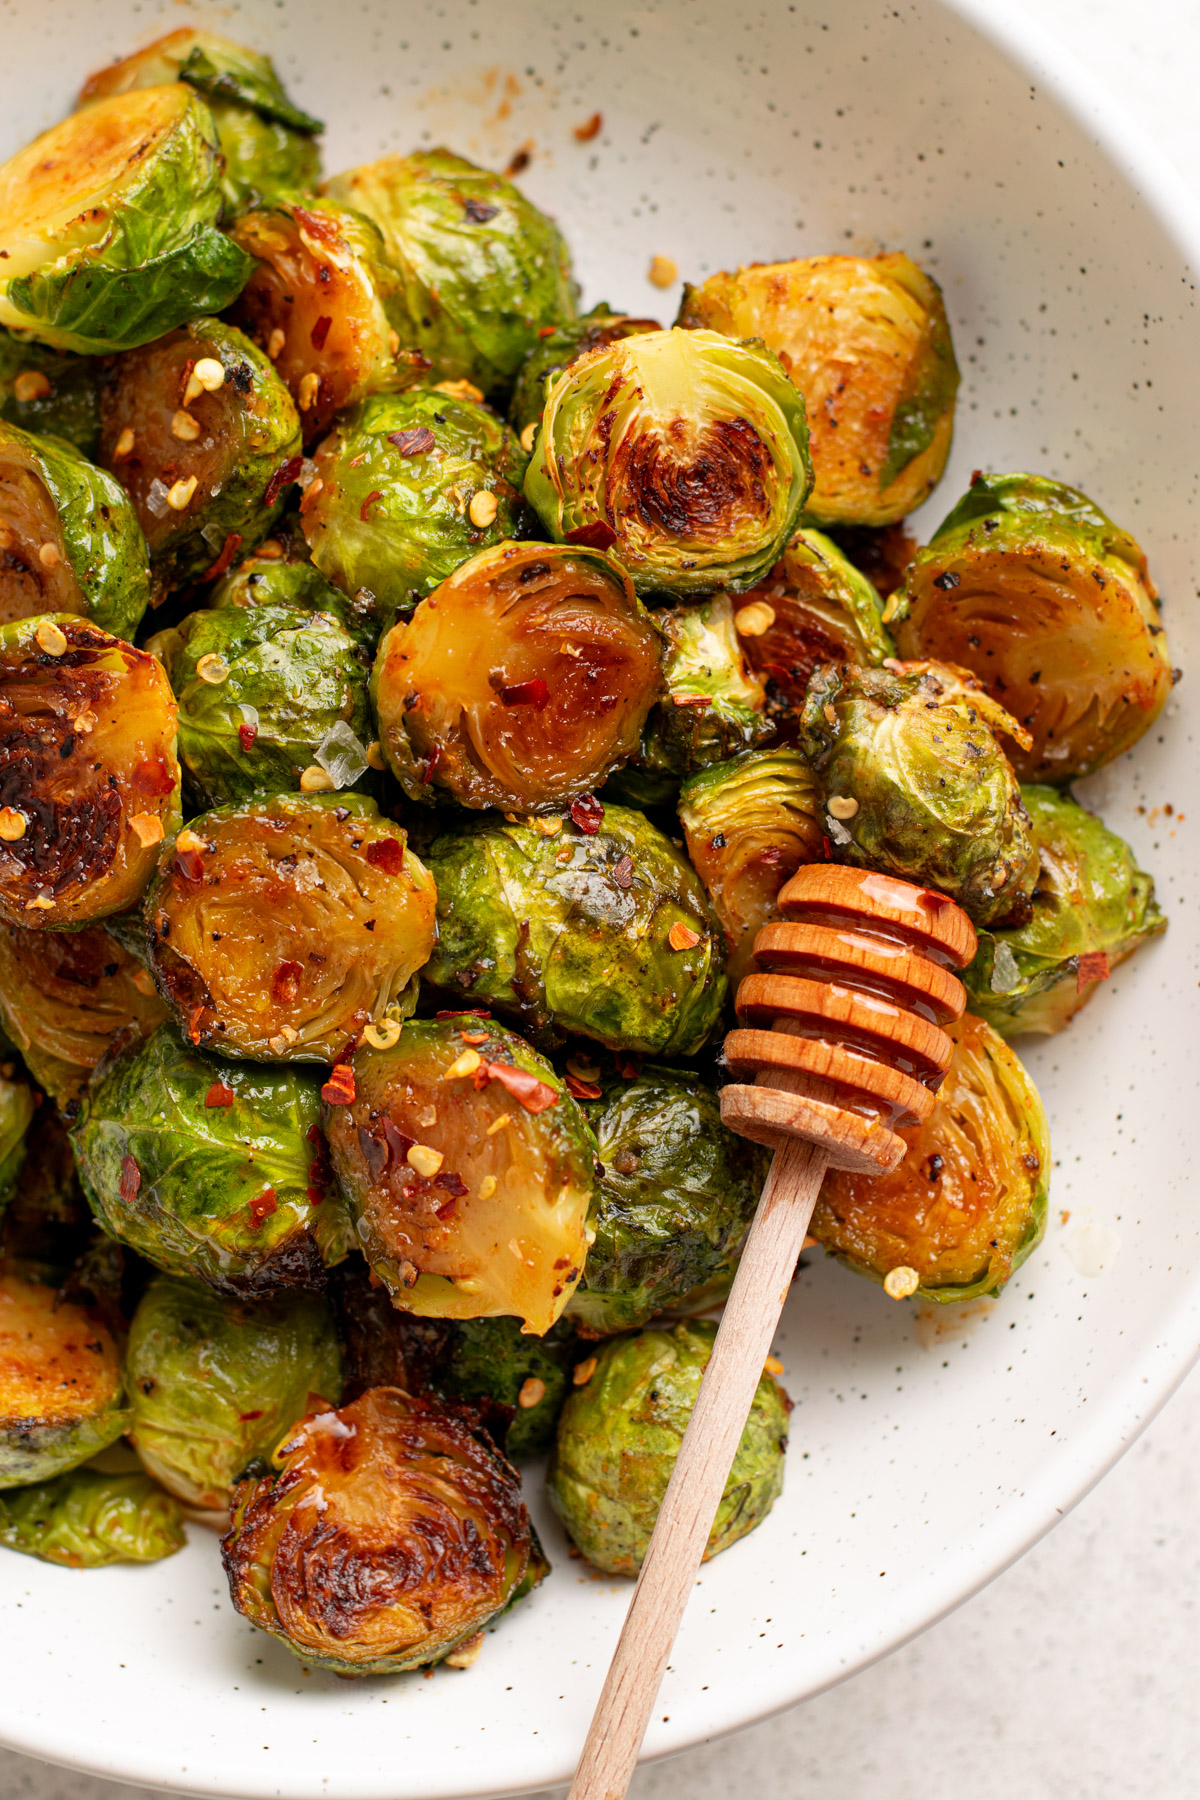 brussel sprouts in a white bowl topped with pepper flakes and a honey dipper.